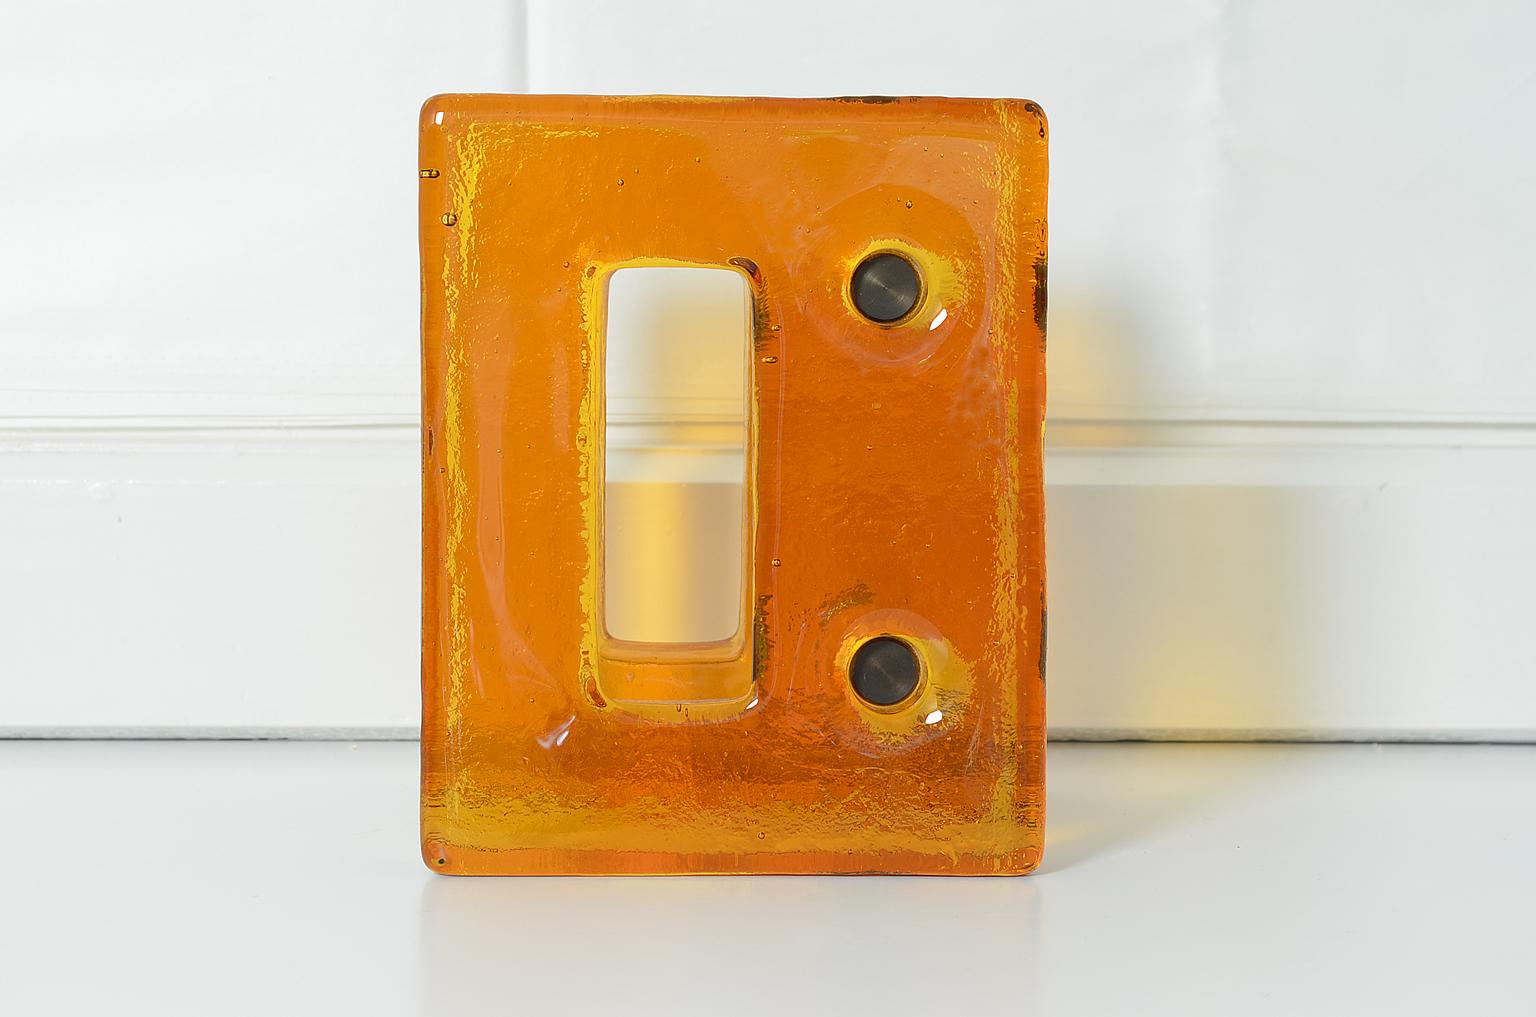 Mid-Century Modern Push and Pull Door Handle in Orange Glass with Brass Fittings, France, 1970s For Sale